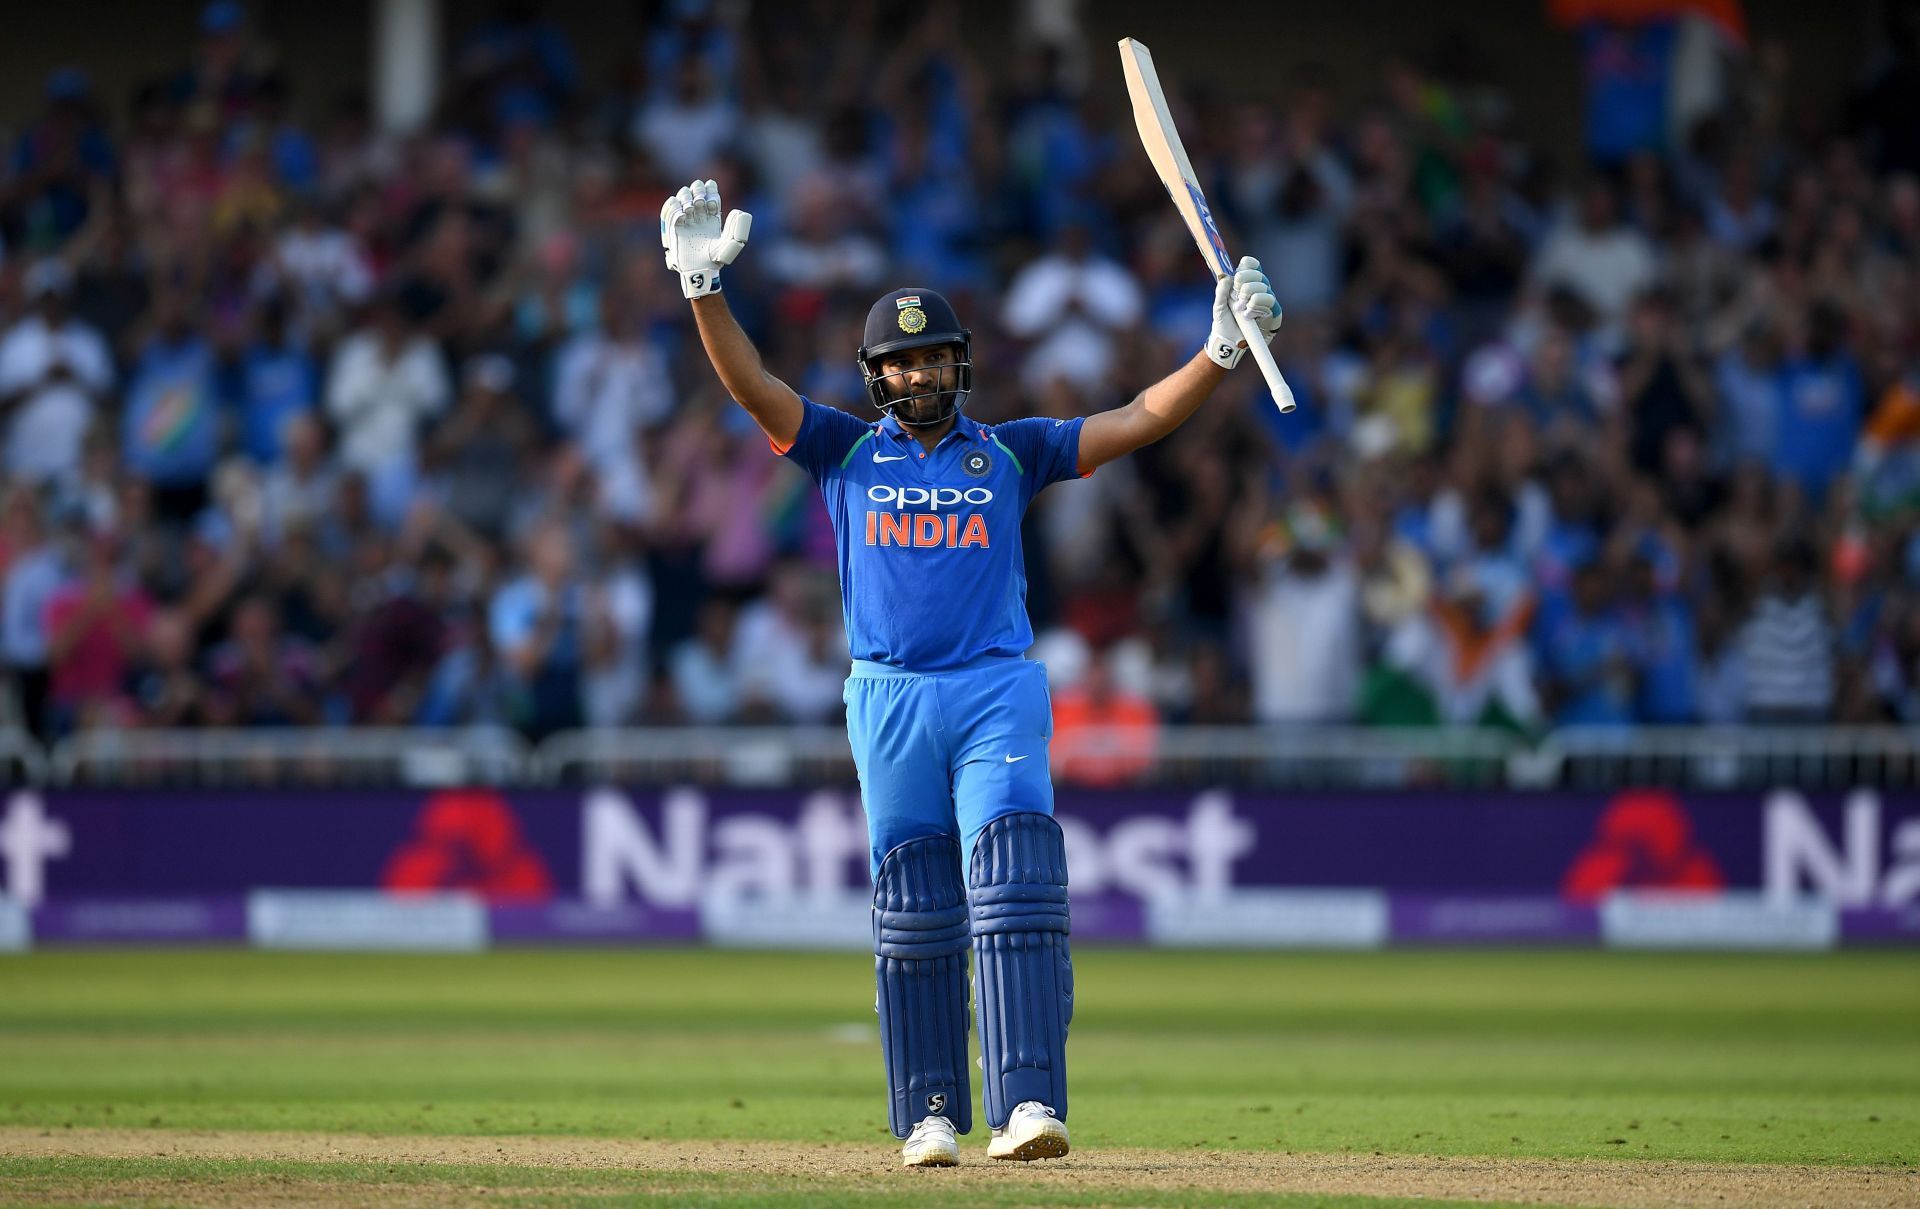 Rohit Sharma has scored double centuries for fun in his ODI career.